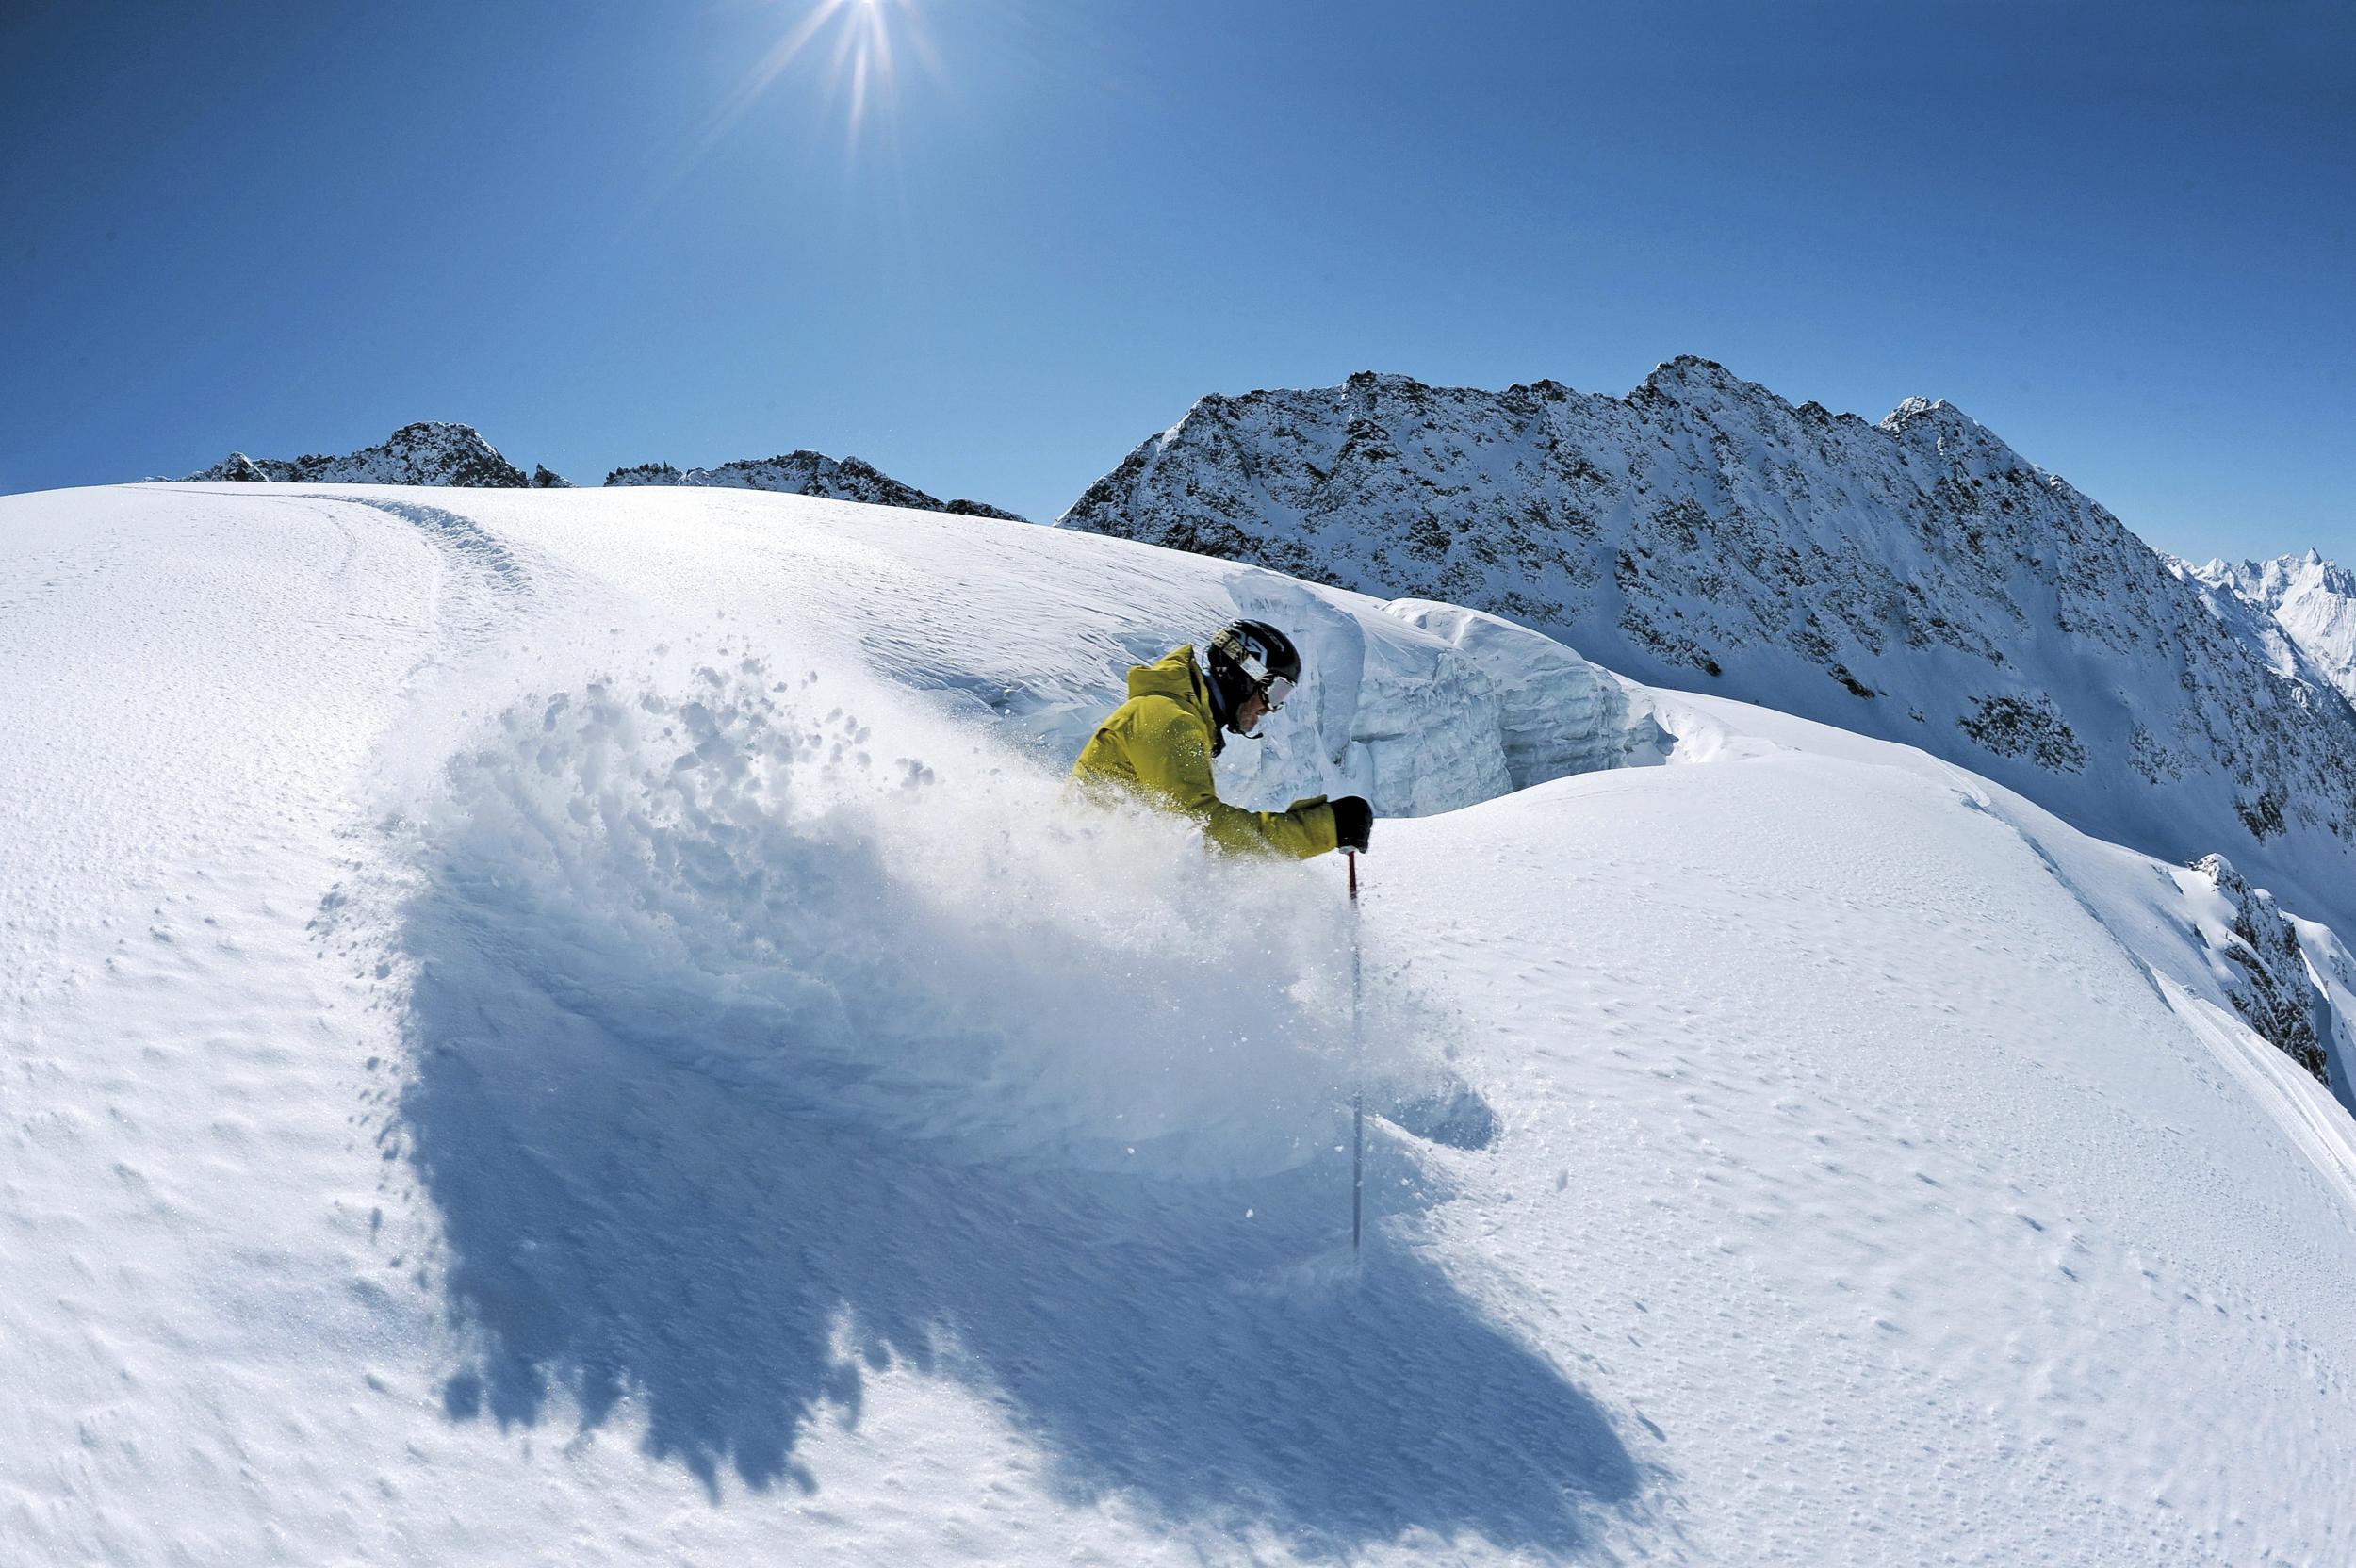 There are many great snow-sure slopes in the resorts of Ötztal